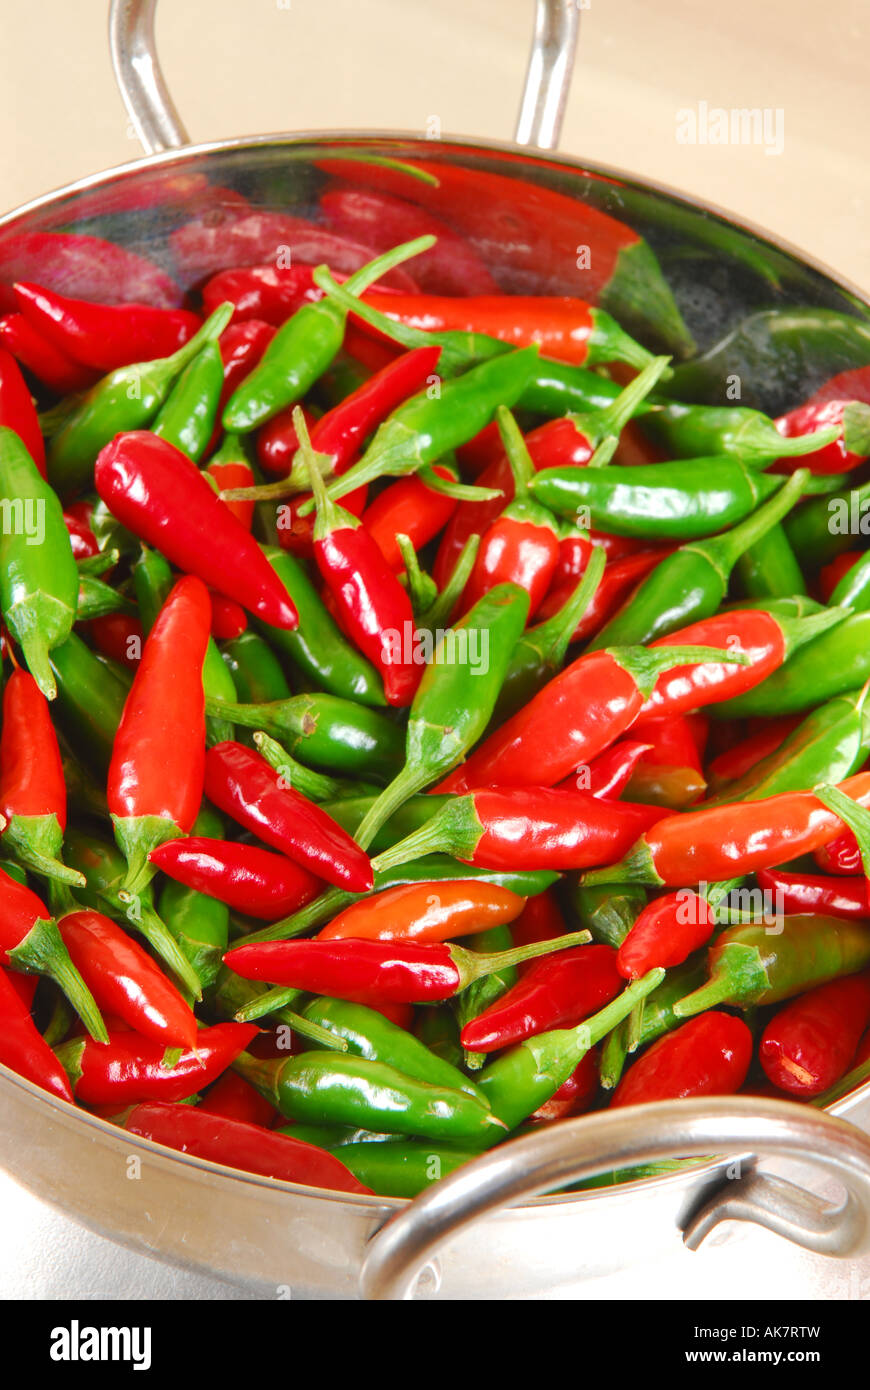 Red and green ripe and unripe bird's eye chillies in a bowl. Stock Photo